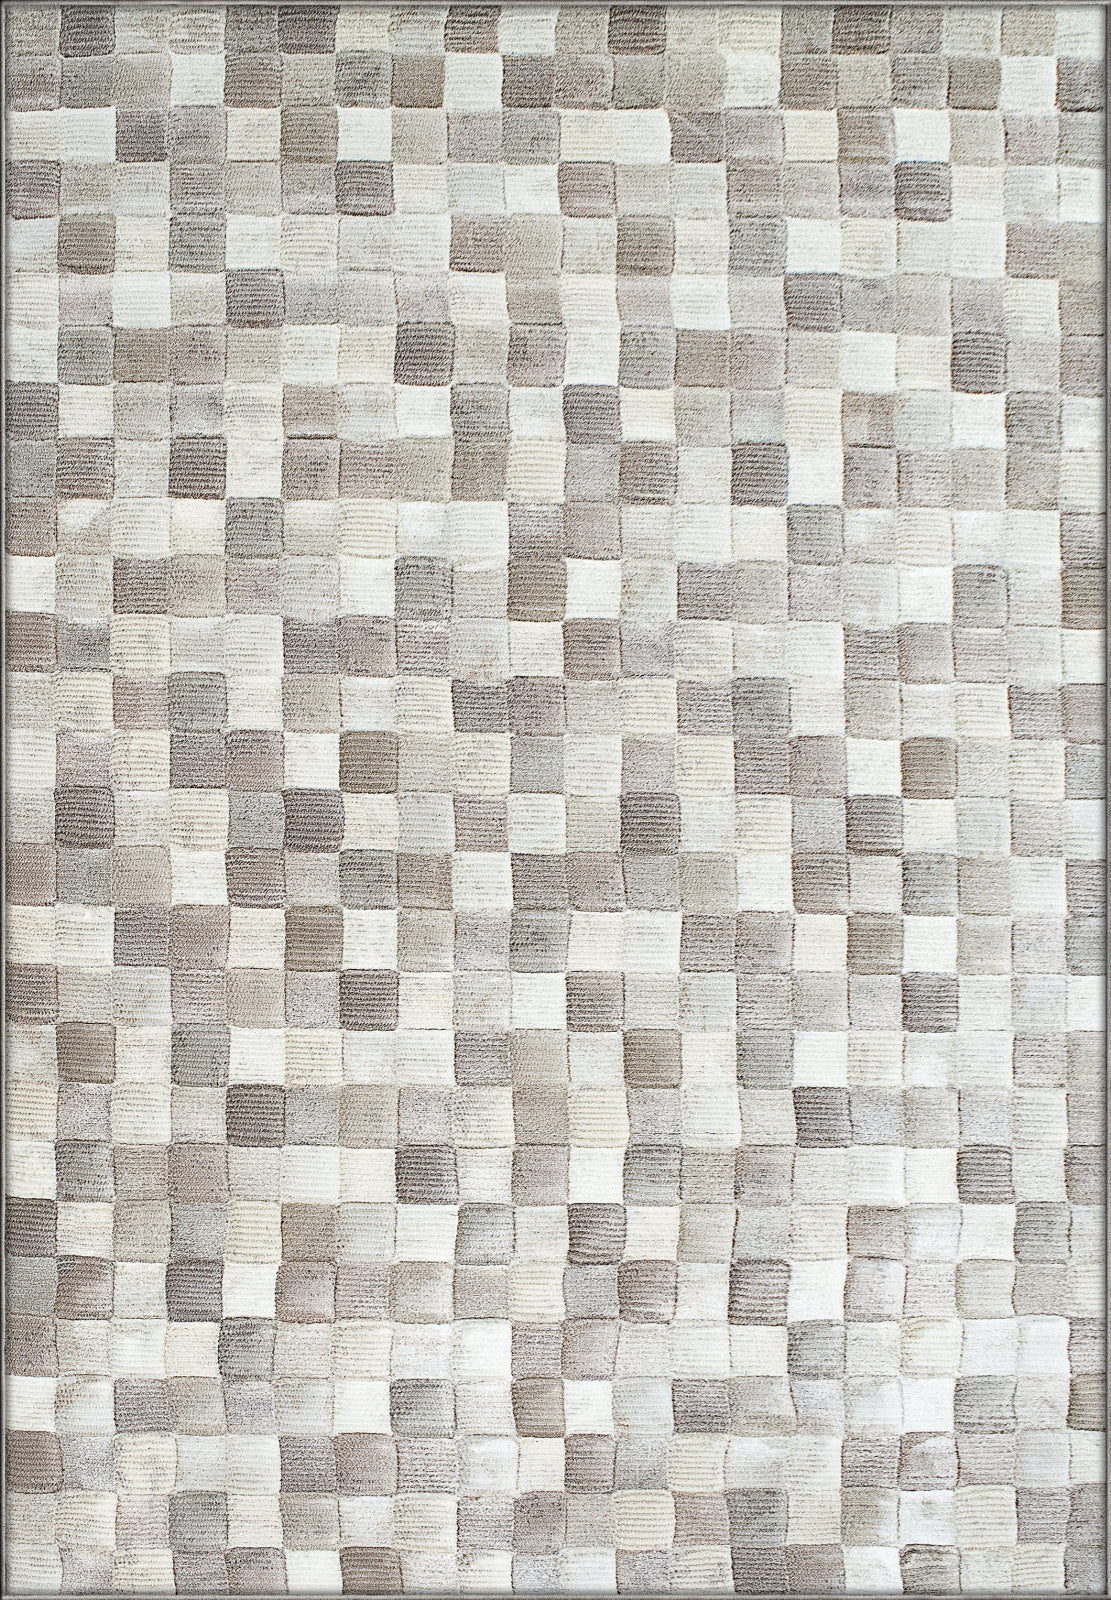 Dynamic Rugs Eclipse 63339 Beige Area Rug main image